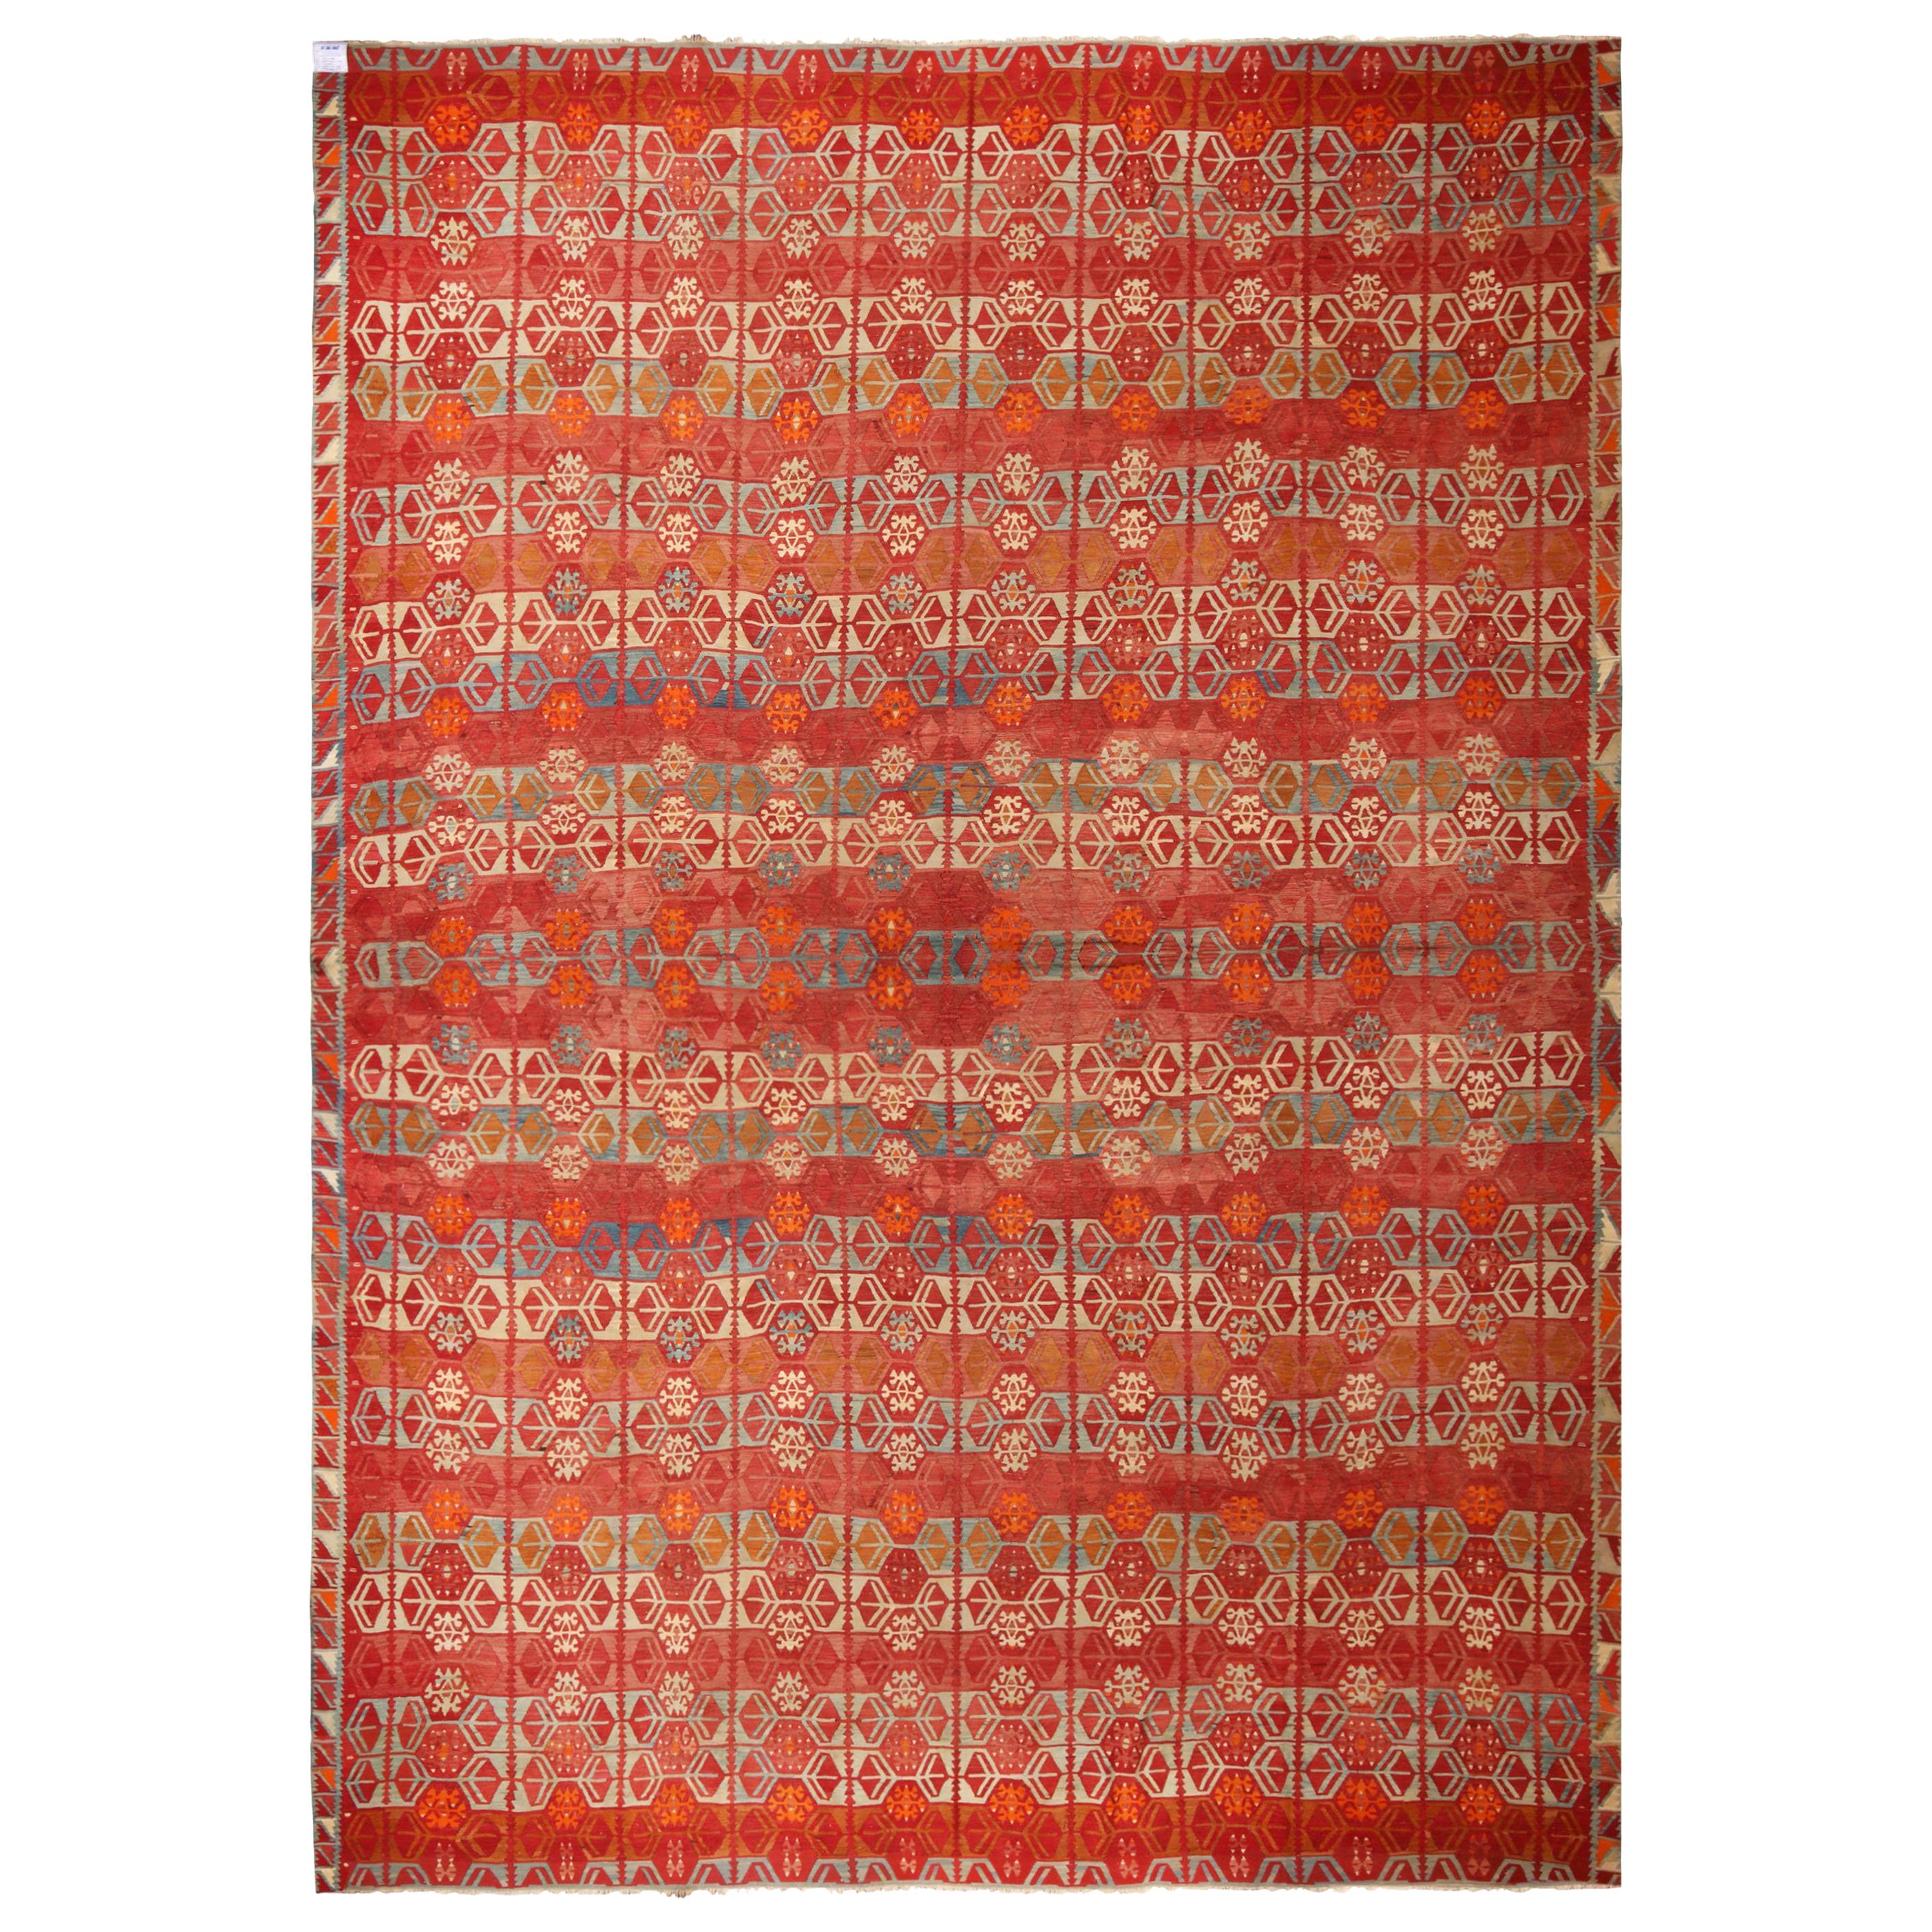 Vintage Sarkisla Red Wool Kilim Rug with Vibrant Accents